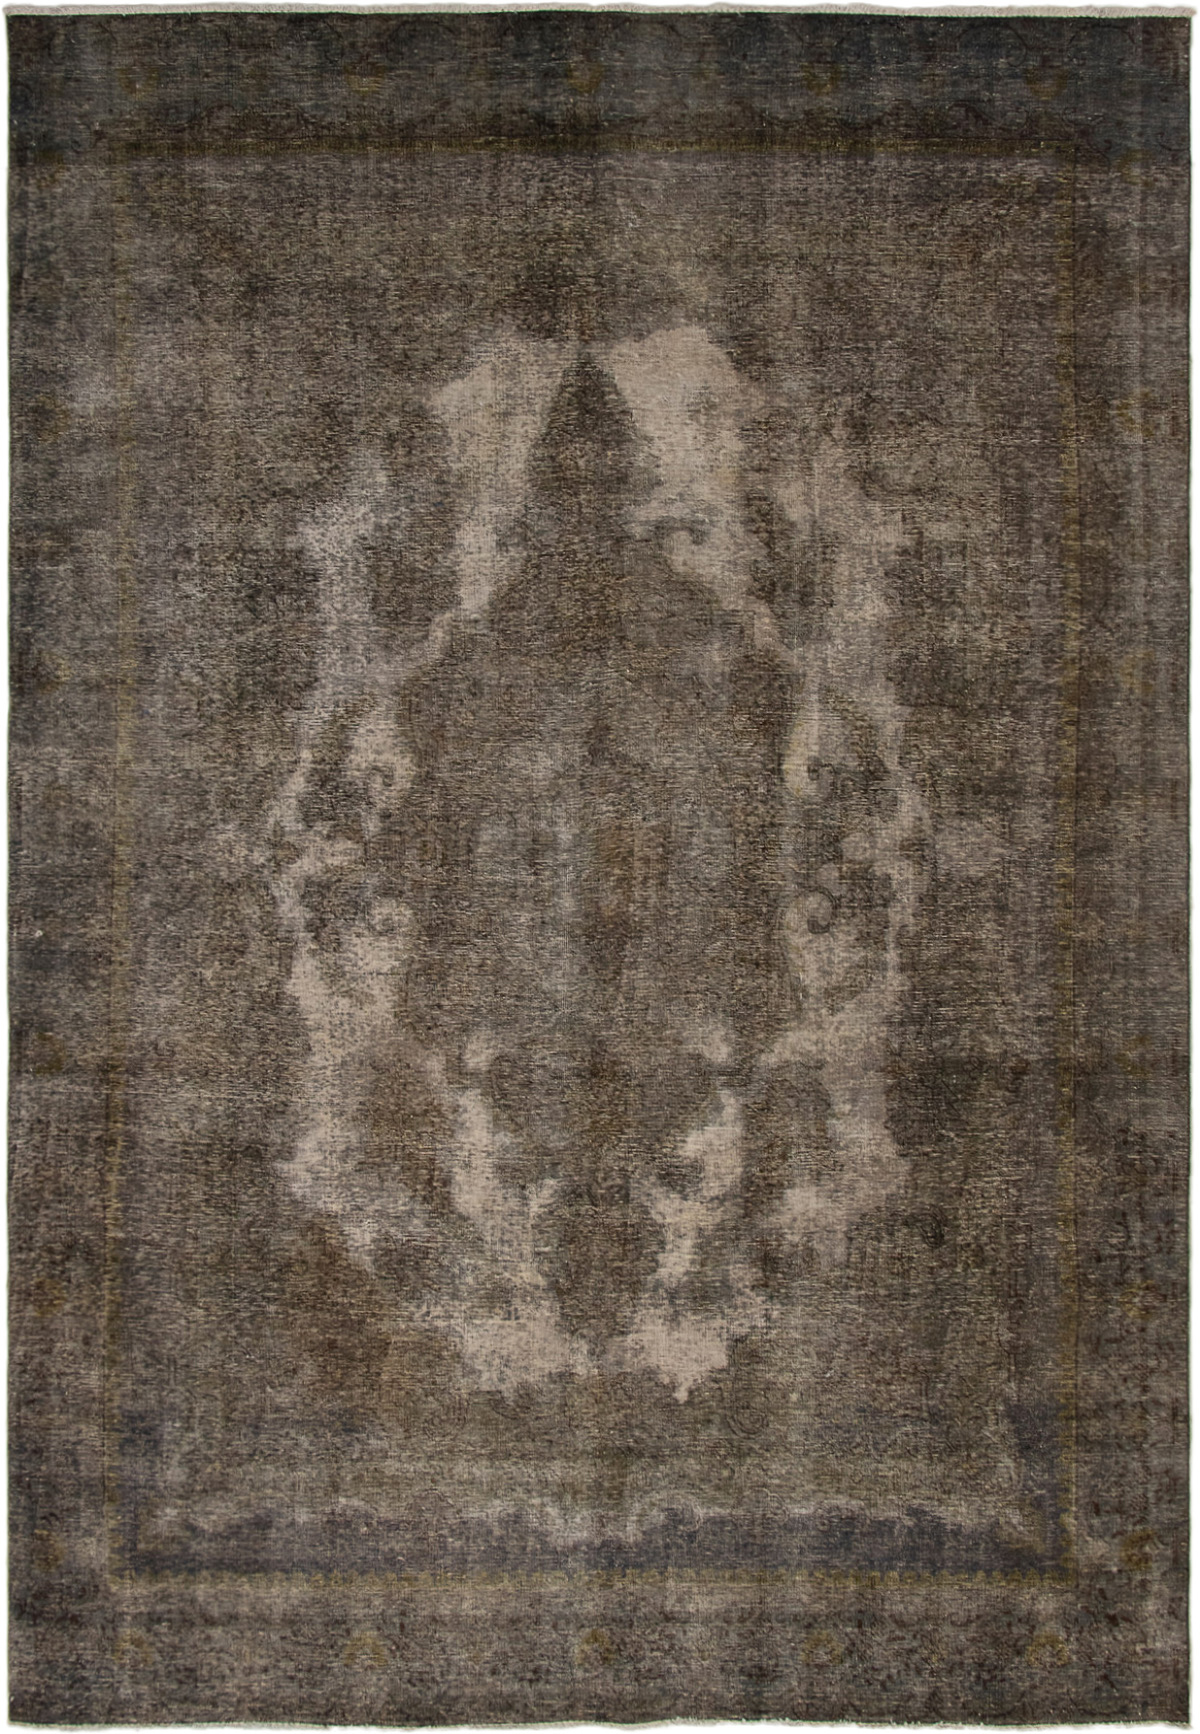 Hand-knotted Color Transition Dark Grey Wool Rug 8'3" x 12'2" Size: 8'3" x 12'2"  